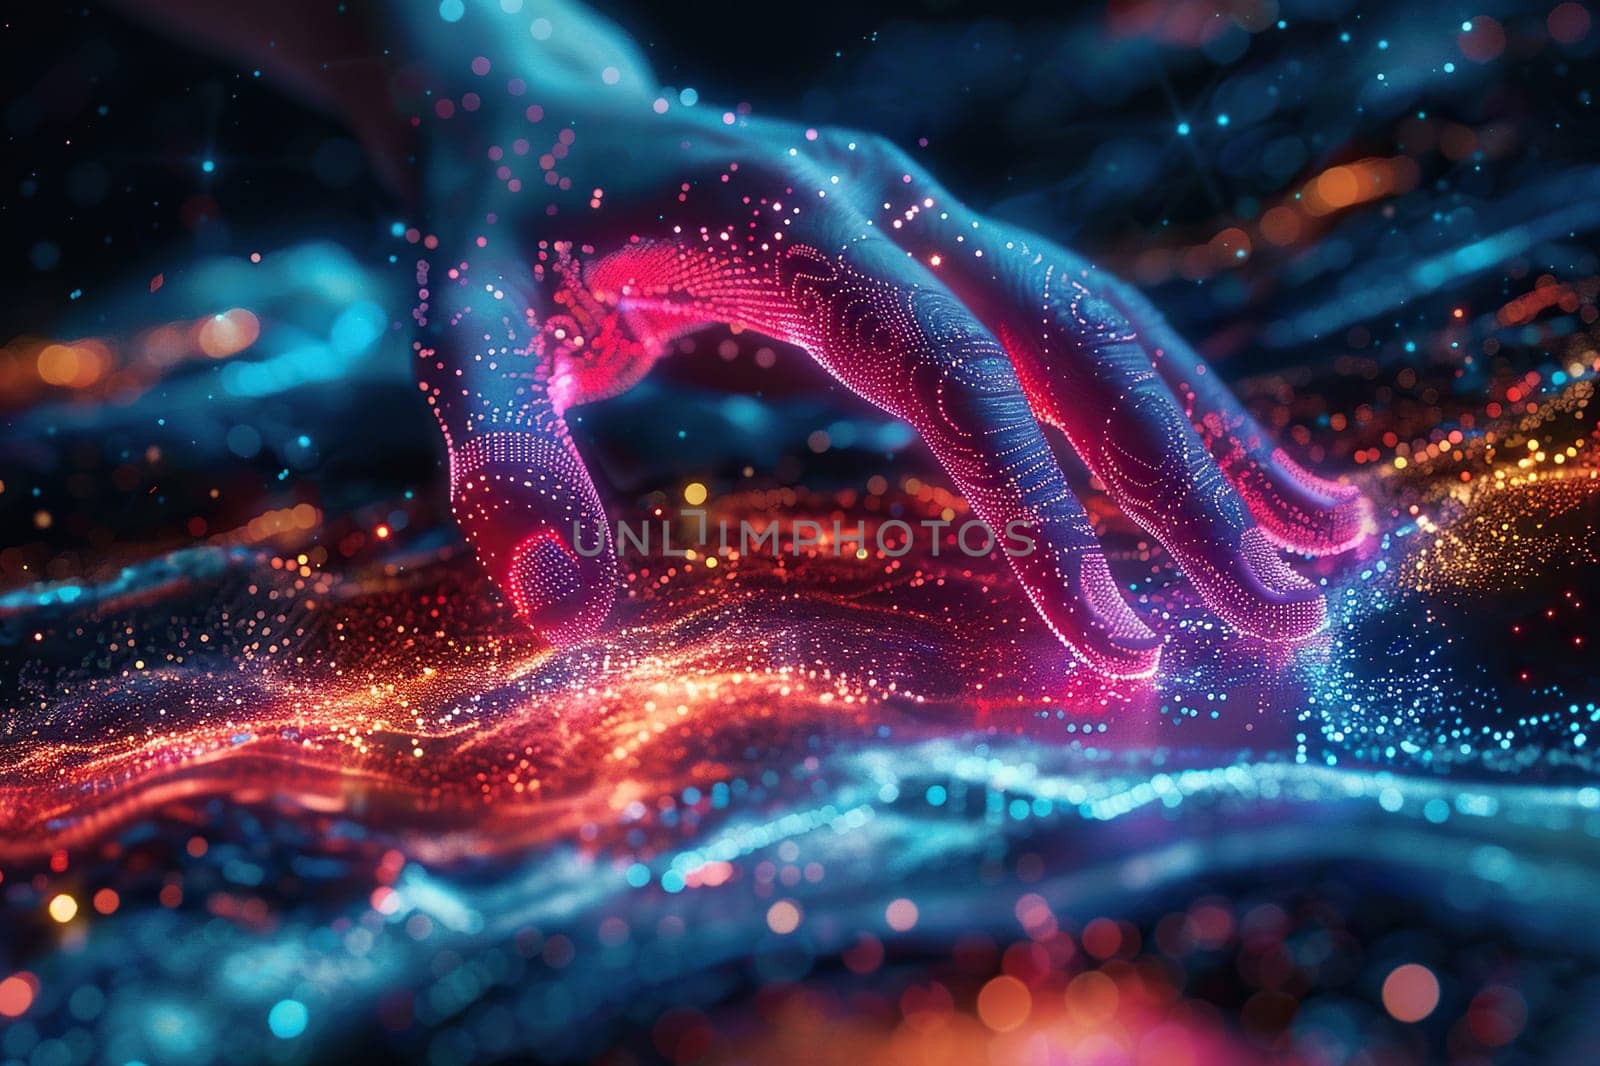 A person's hand in a light information flow. Abstract image of data in the form of neon threads.